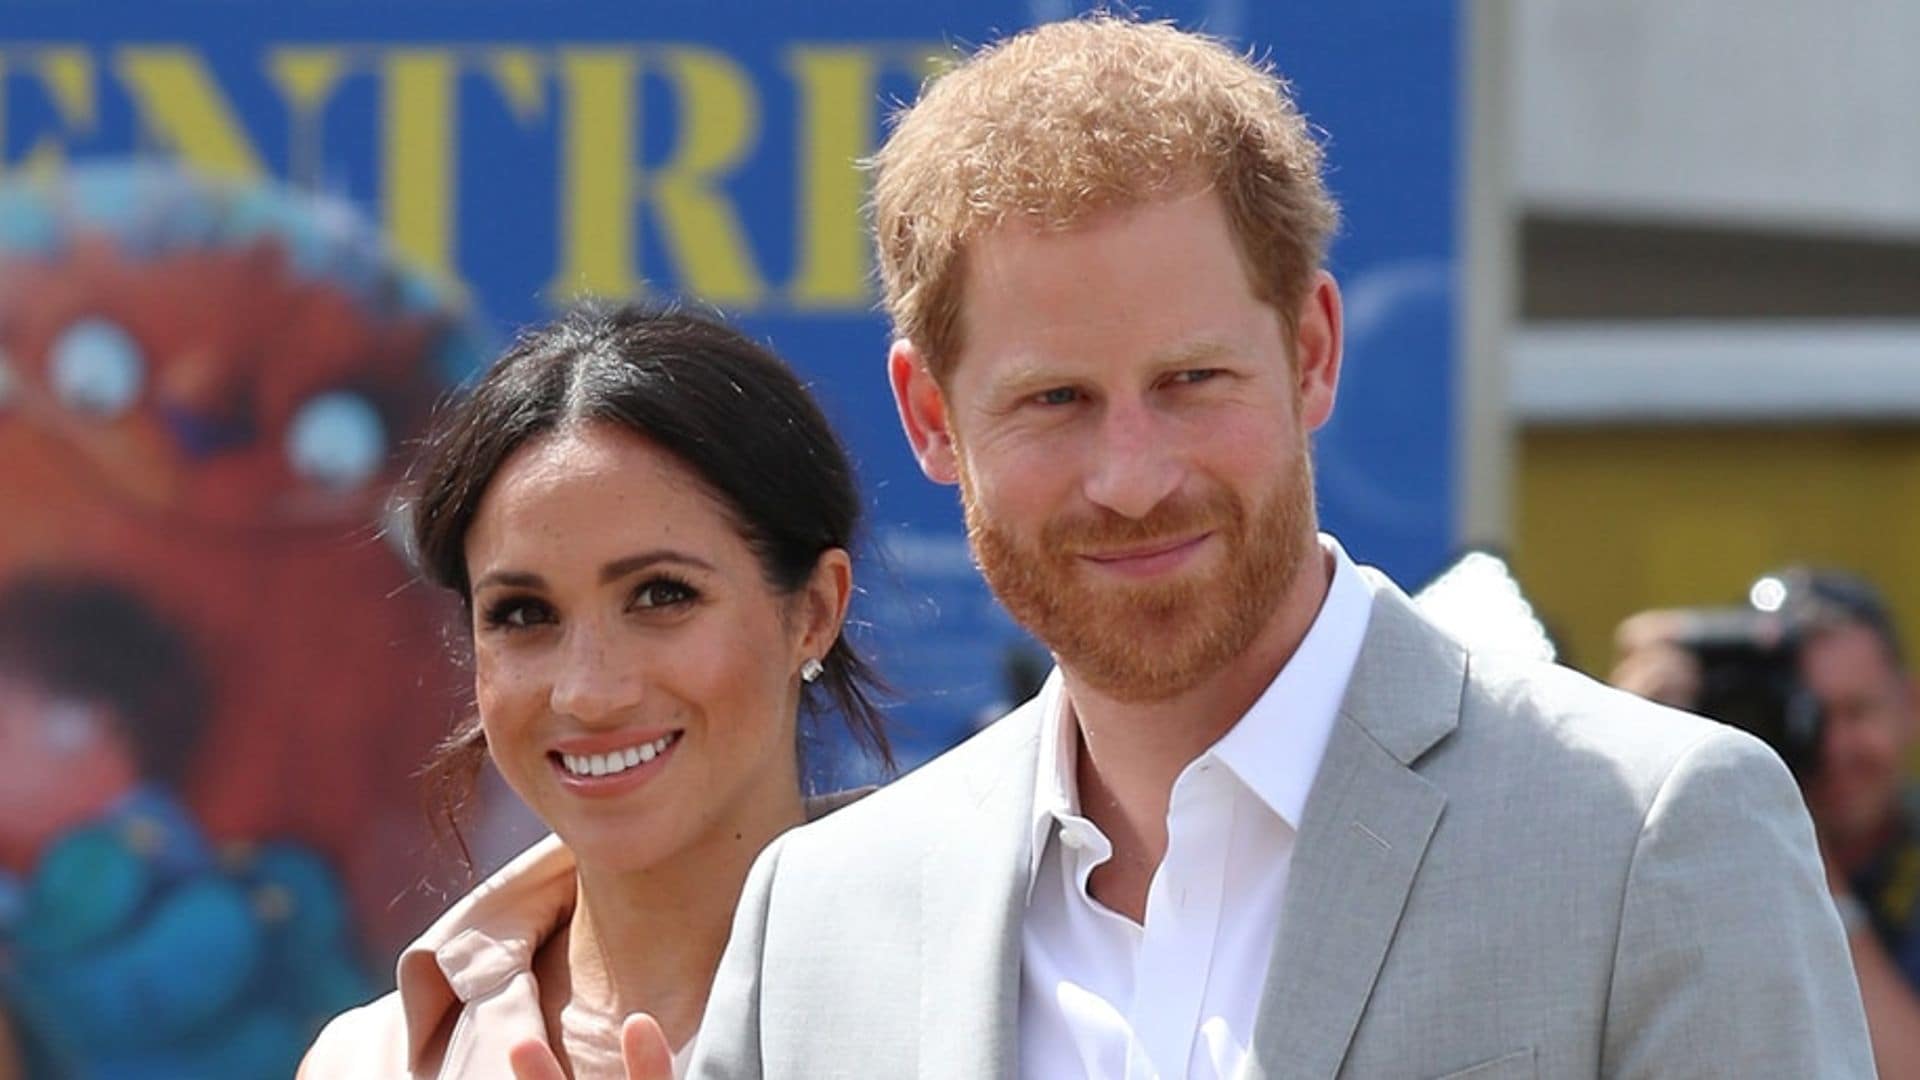 Prince Harry, Meghan Markle named Time's 25 Most Influential People on the Internet